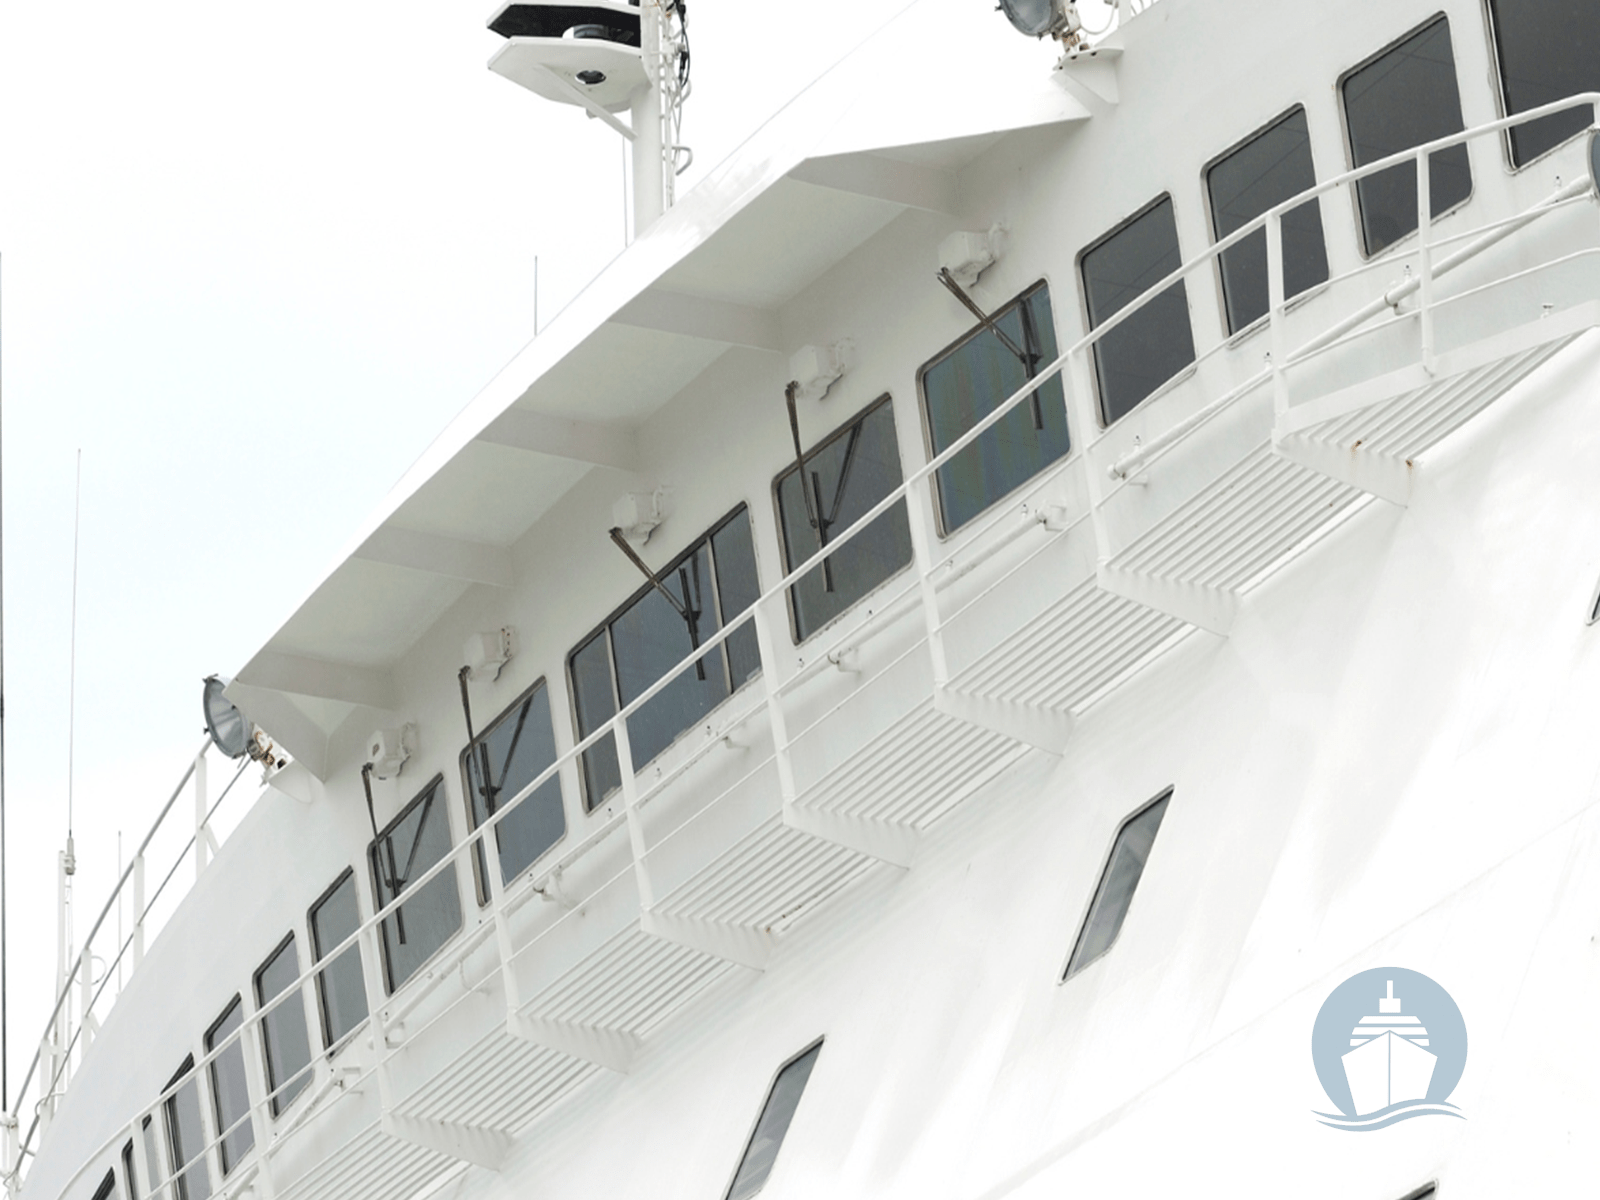 Solarglide Pantograph window wipers onboard cruise liner